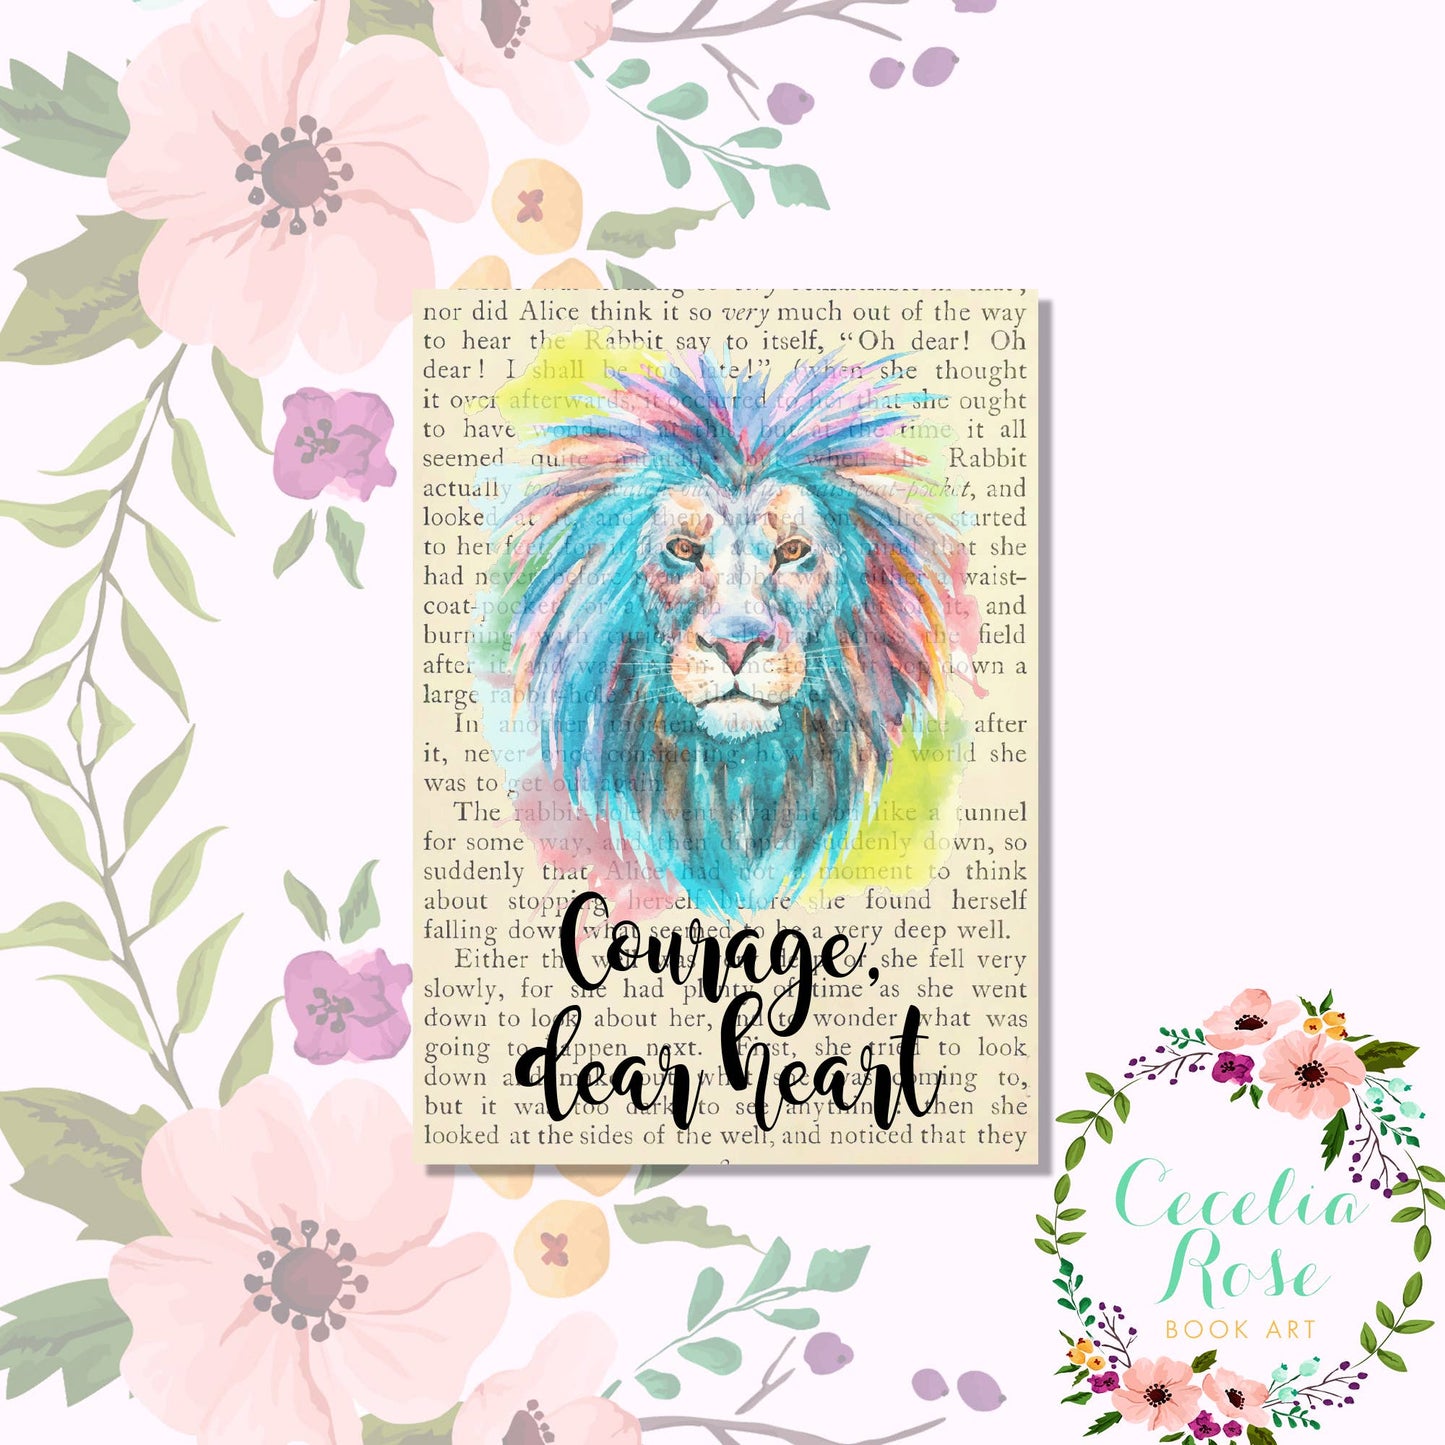 Courage, Dear Heart - Chronicles of Narnia - C.S. Lewis